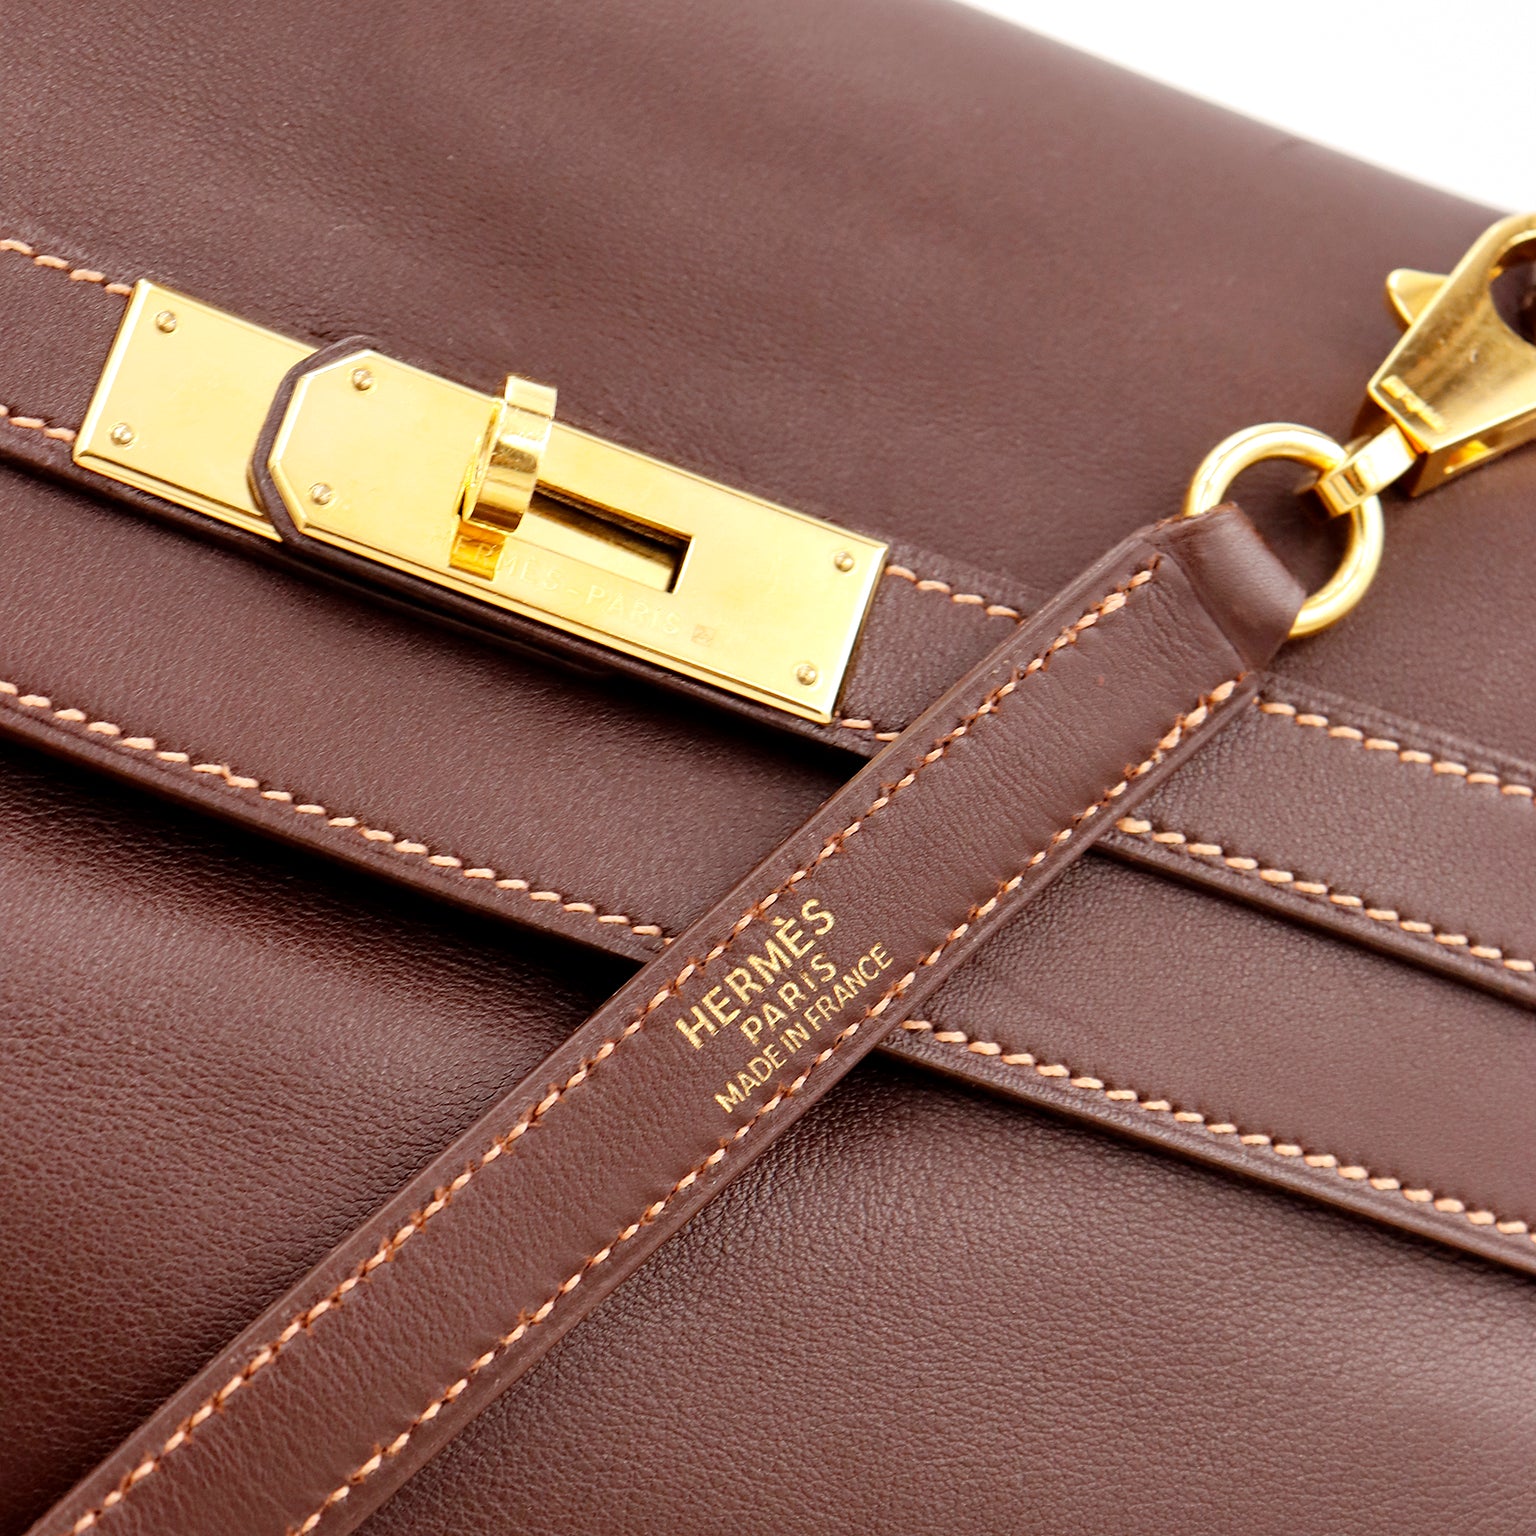 Preowned Hermes Kelly 35 In Turqoise Retourne With  Strap